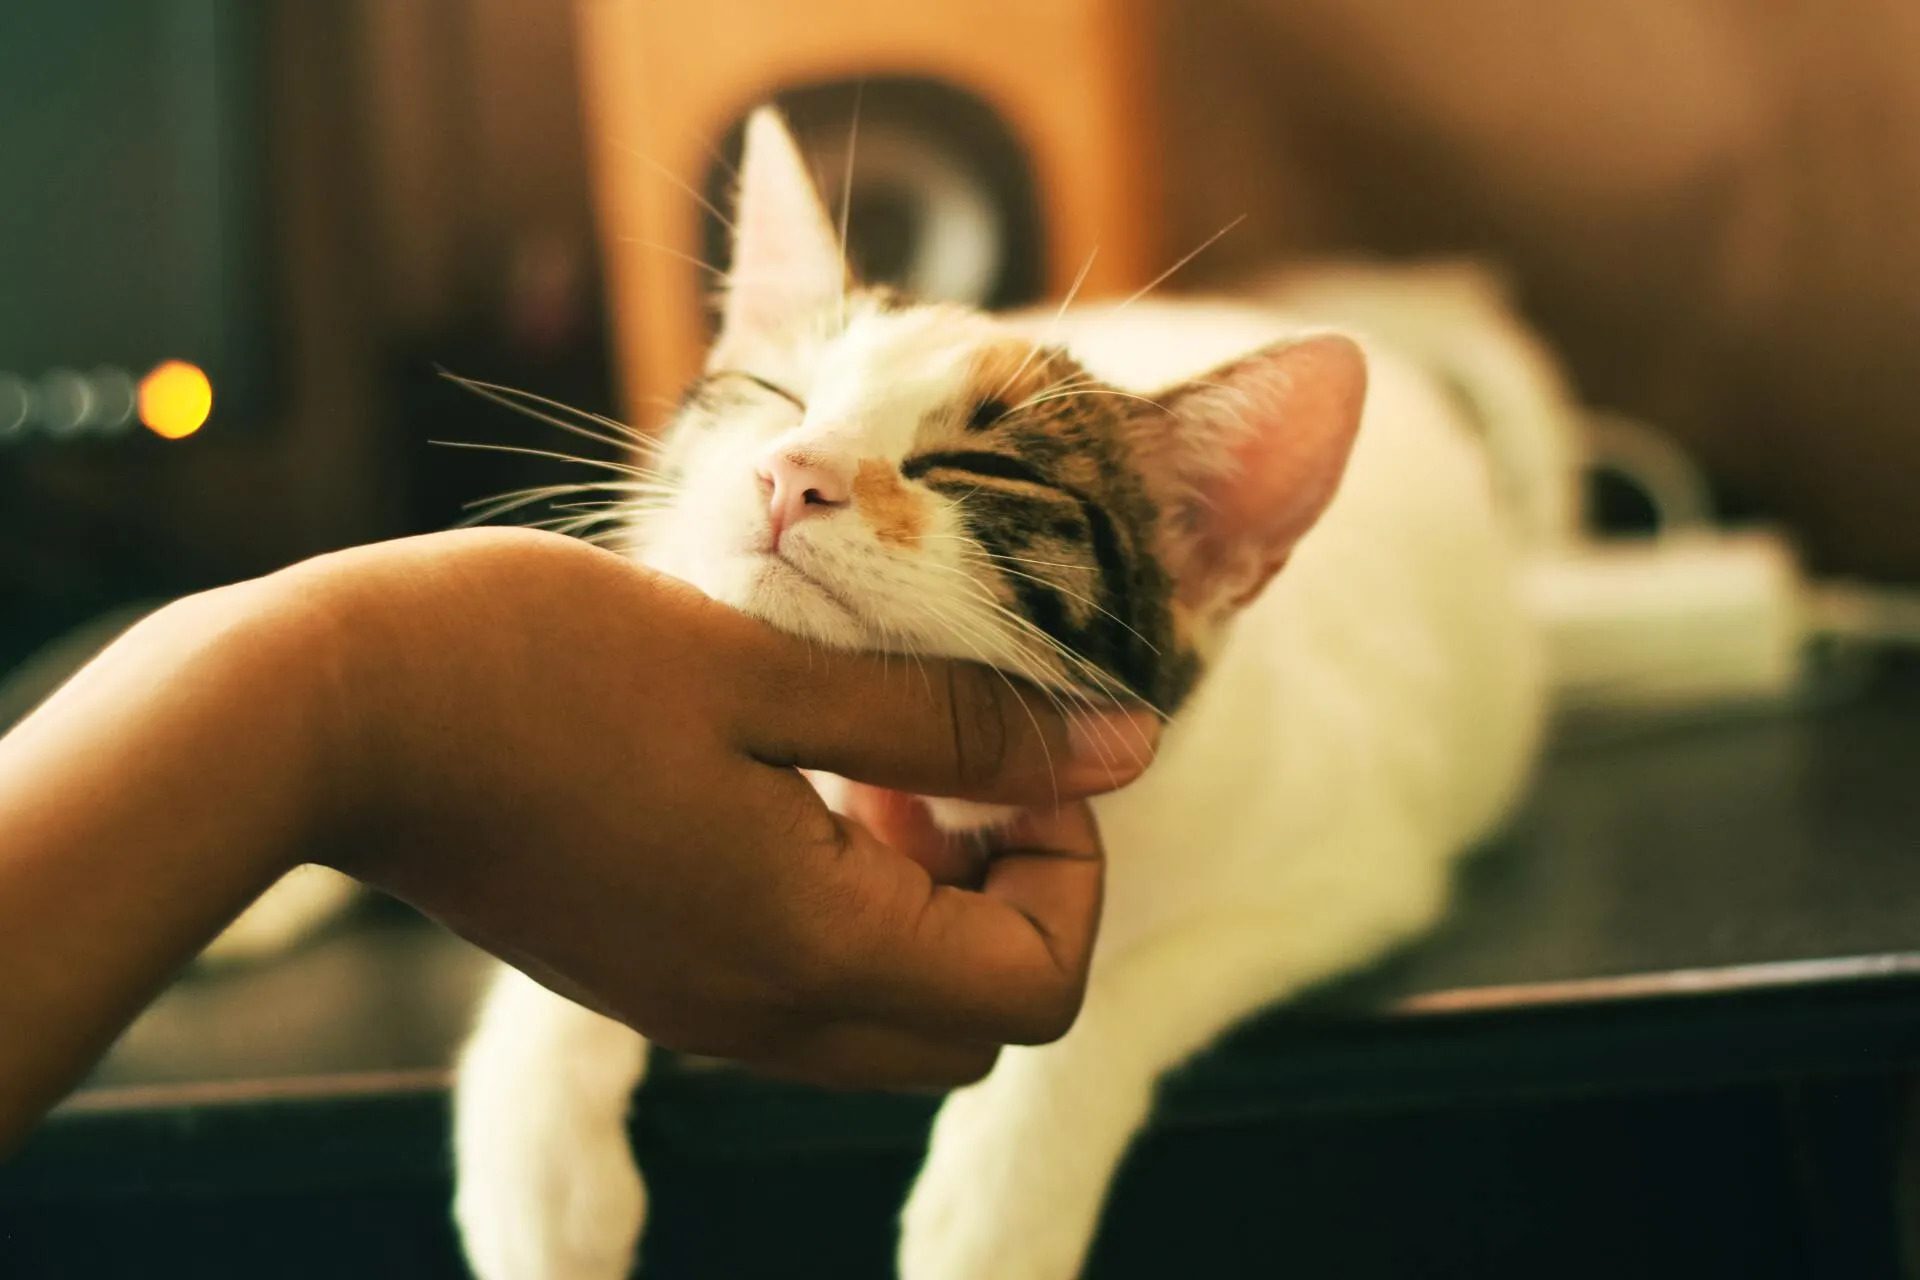 A cat getting petted